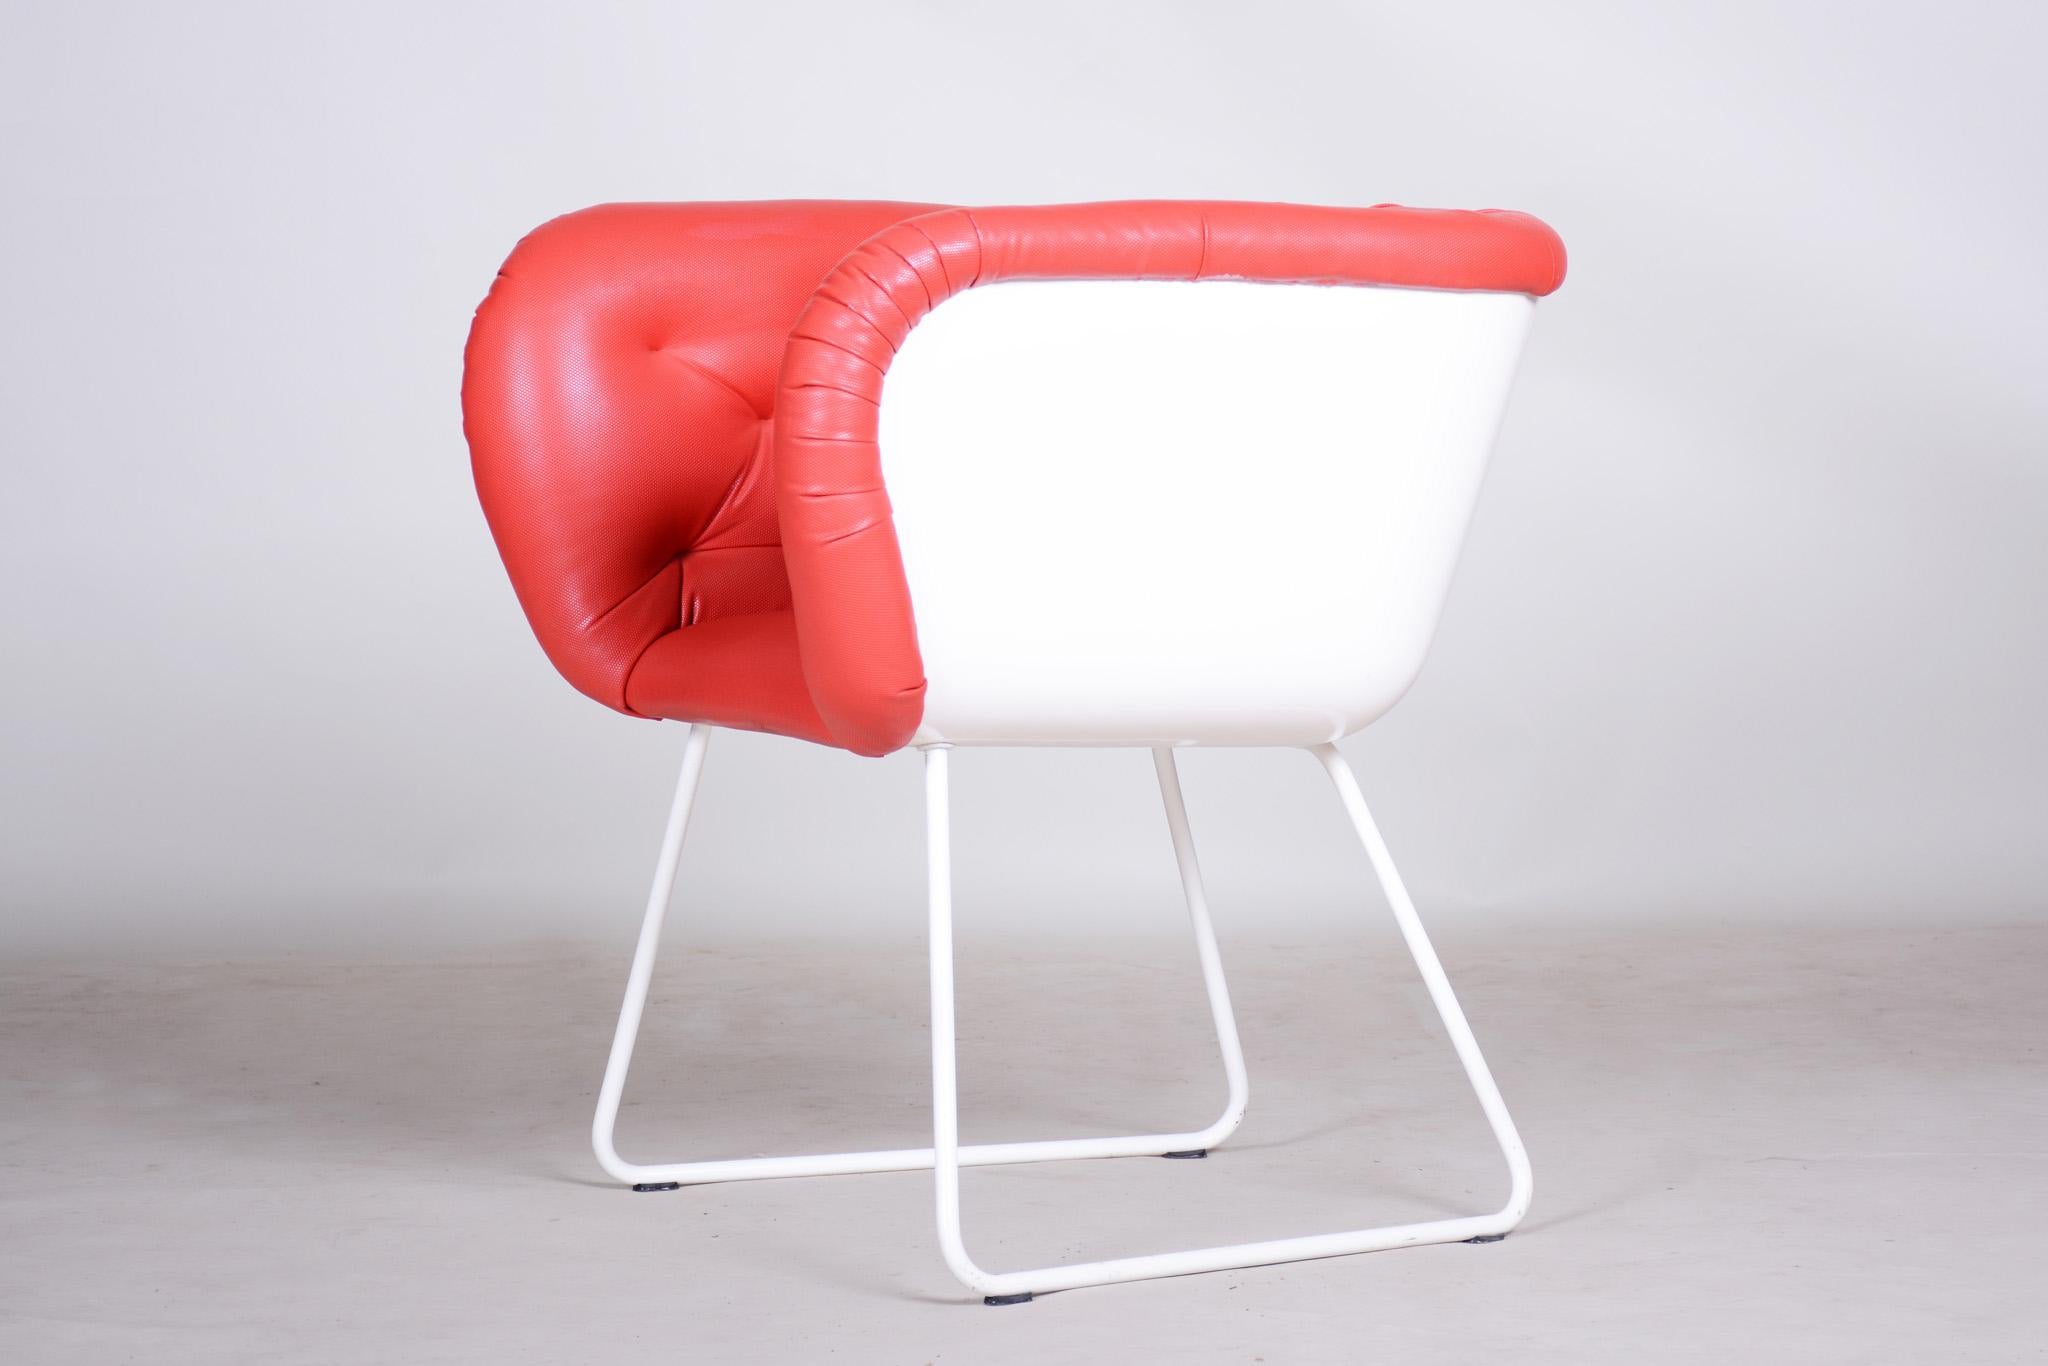 Steel Mid-Century Red and White Armchair, Original Condition, Czechia, 1960s For Sale